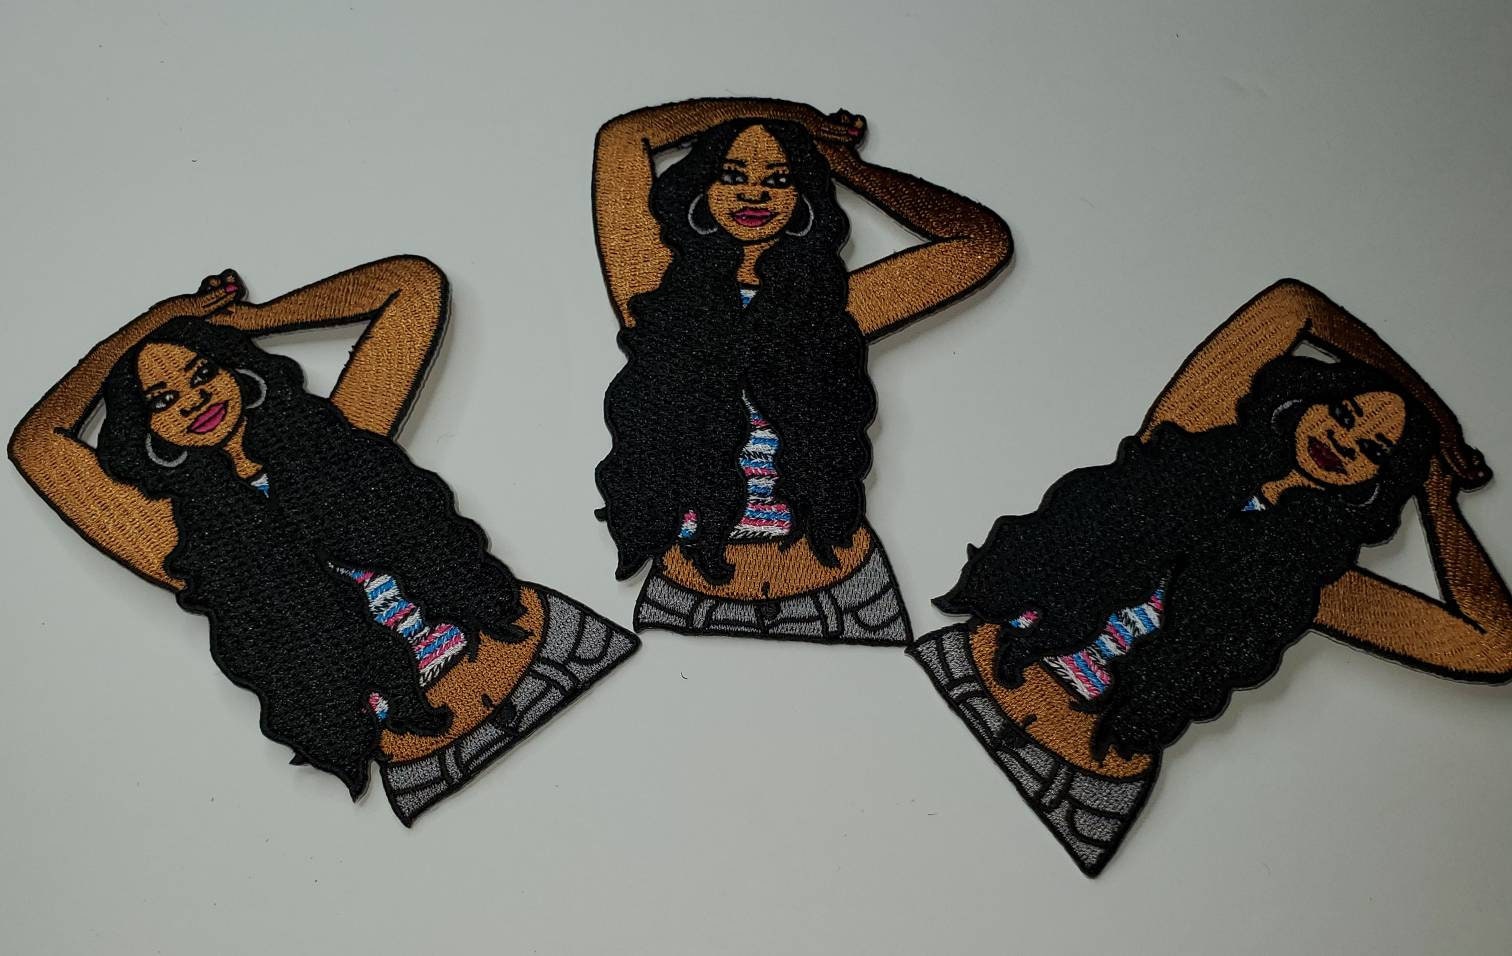 Confidence is Sexy, 100% Embroidered Iron-on Patch, 4-inch Applique; Black Girl Magic Patch, DIY Patch for Denim Jackets and Accessories